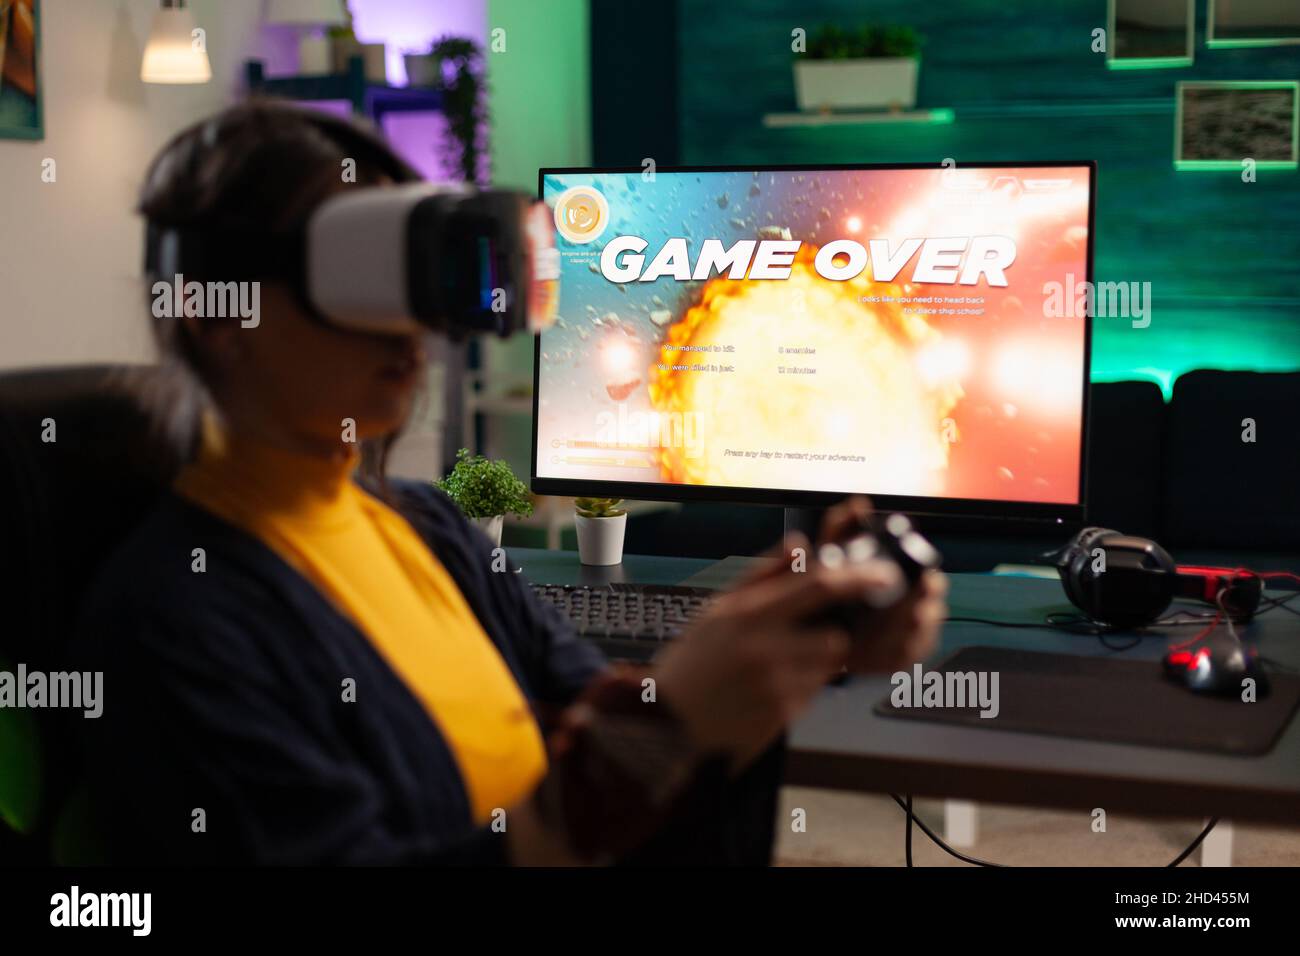 Adult with vr glasses losing video games on monitor. Woman playing game with controller and virtual reality headset on computer. Person lost online game with goggles and joystick. Stock Photo